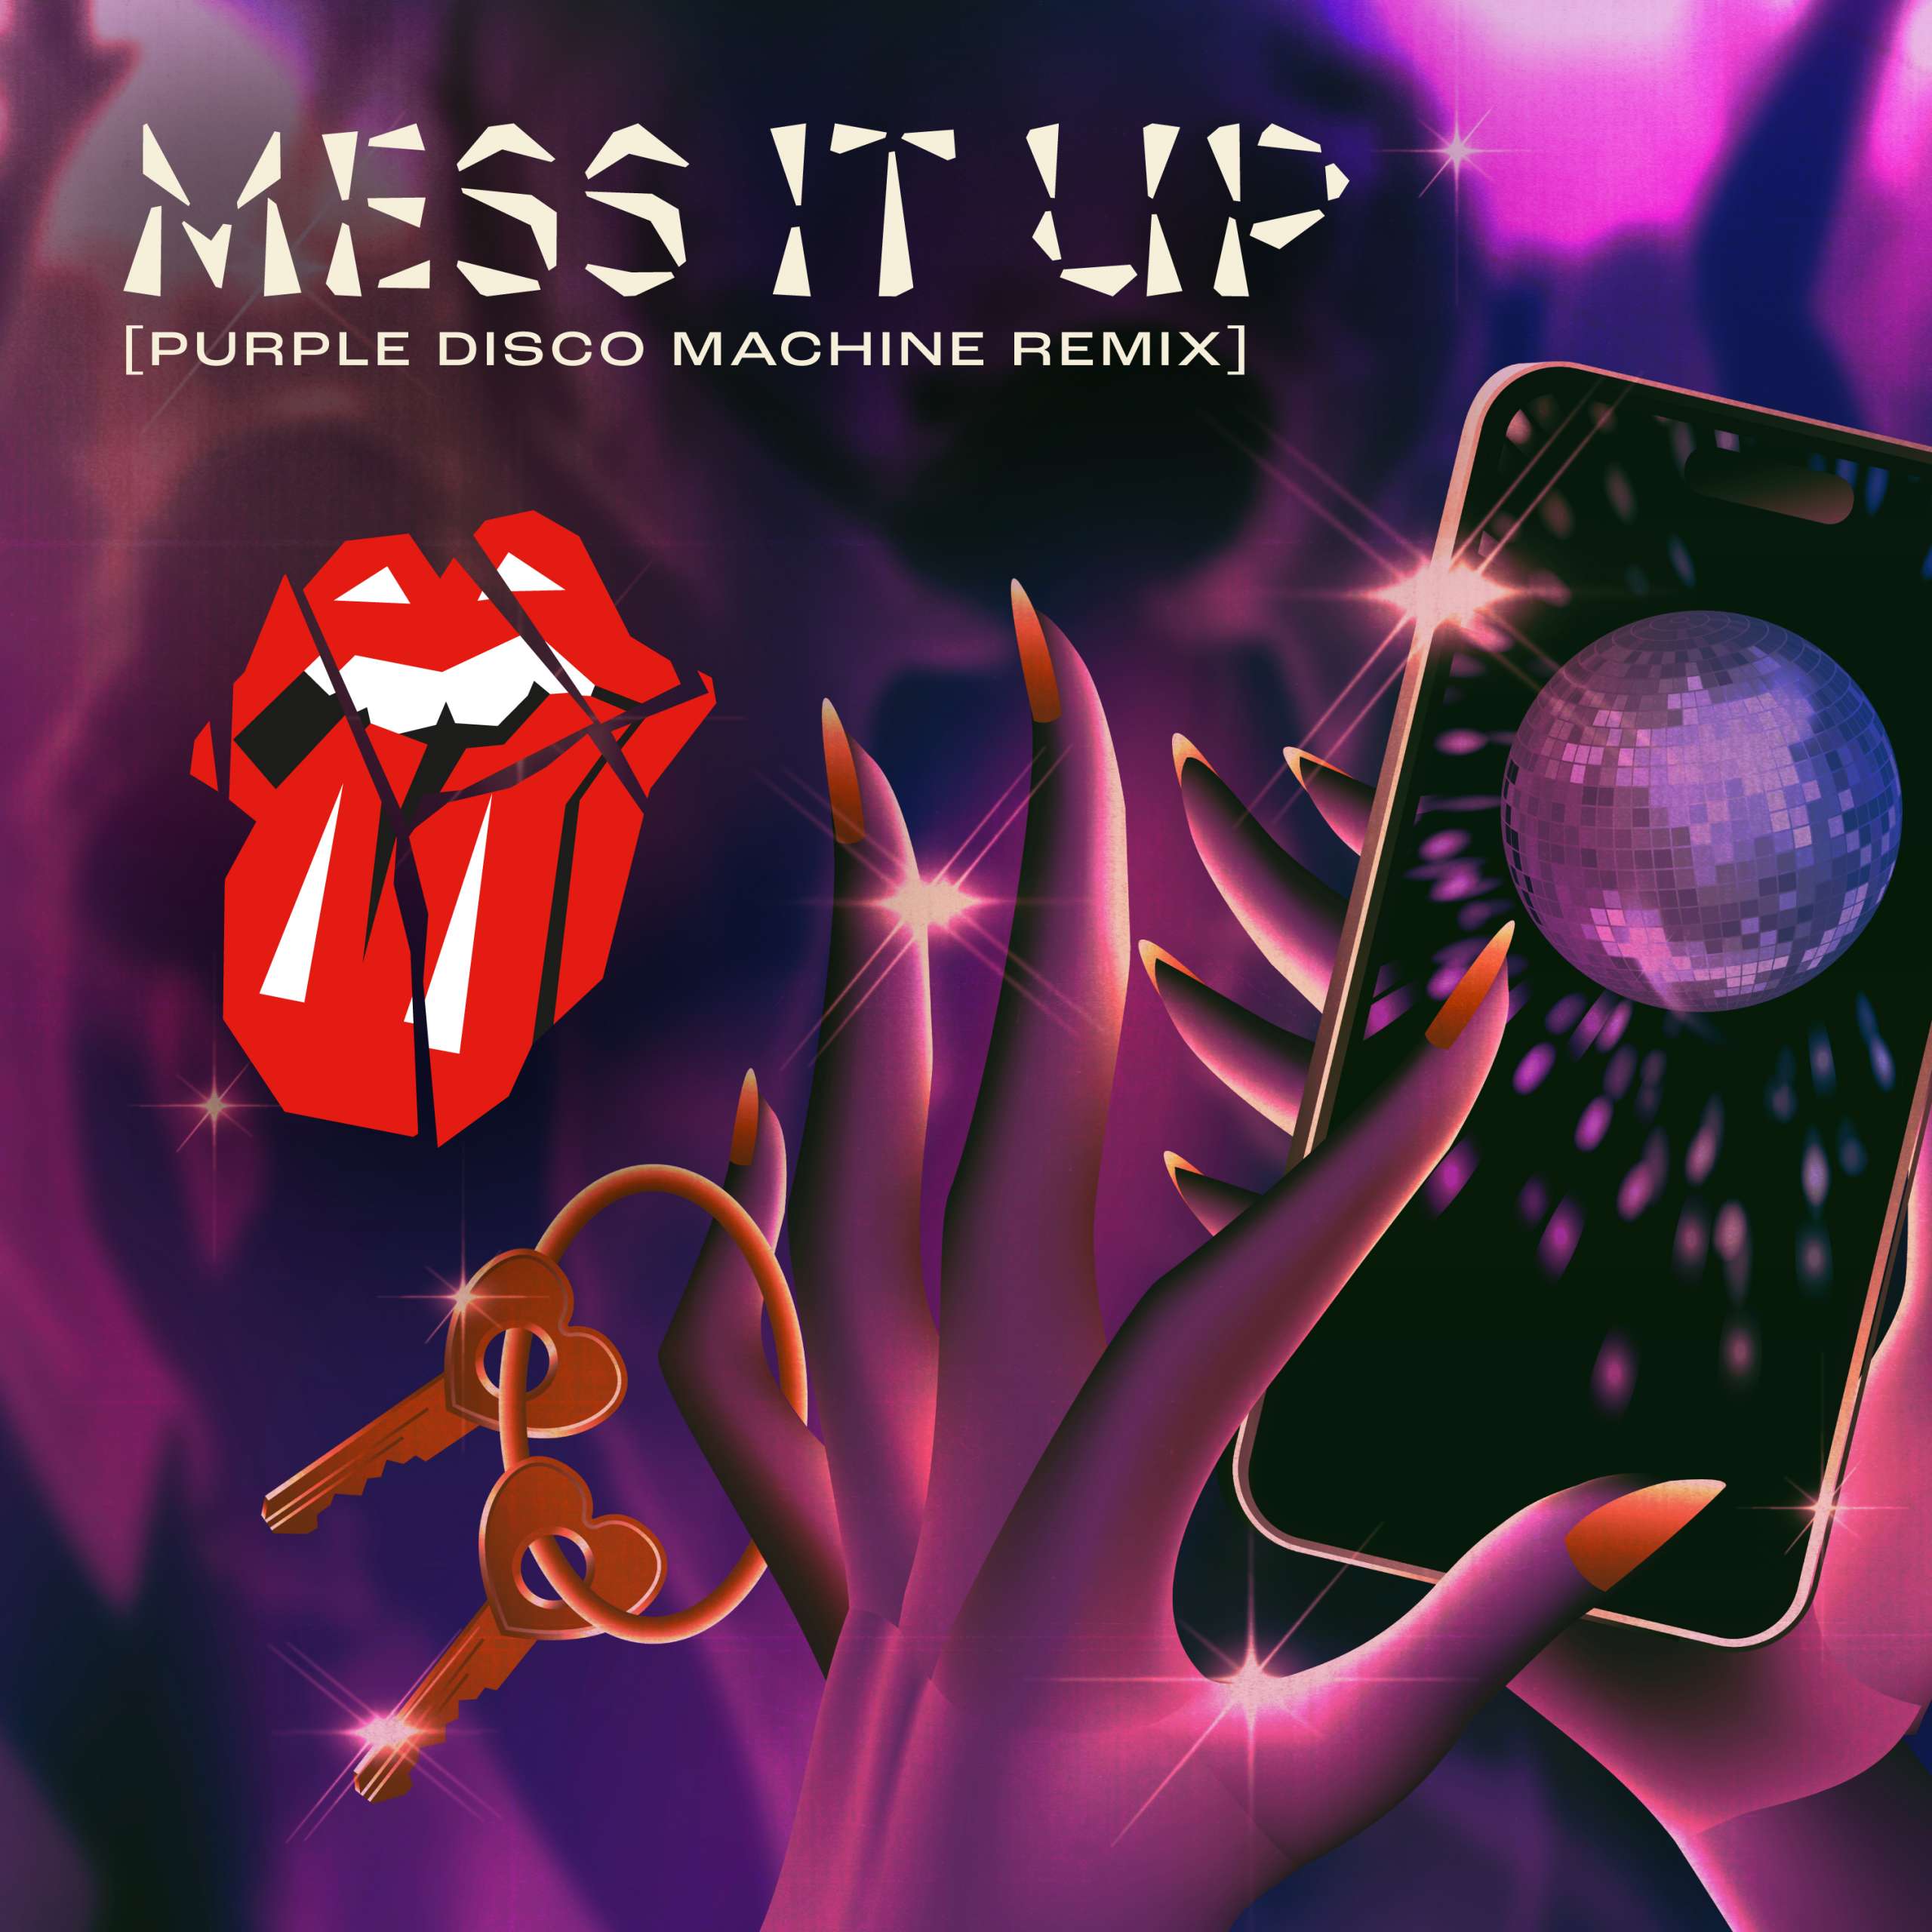 ROLLING STONES ‘MESS IT UP’ PURPLE DISCO MACHINE REMIX ** OUT NOW **